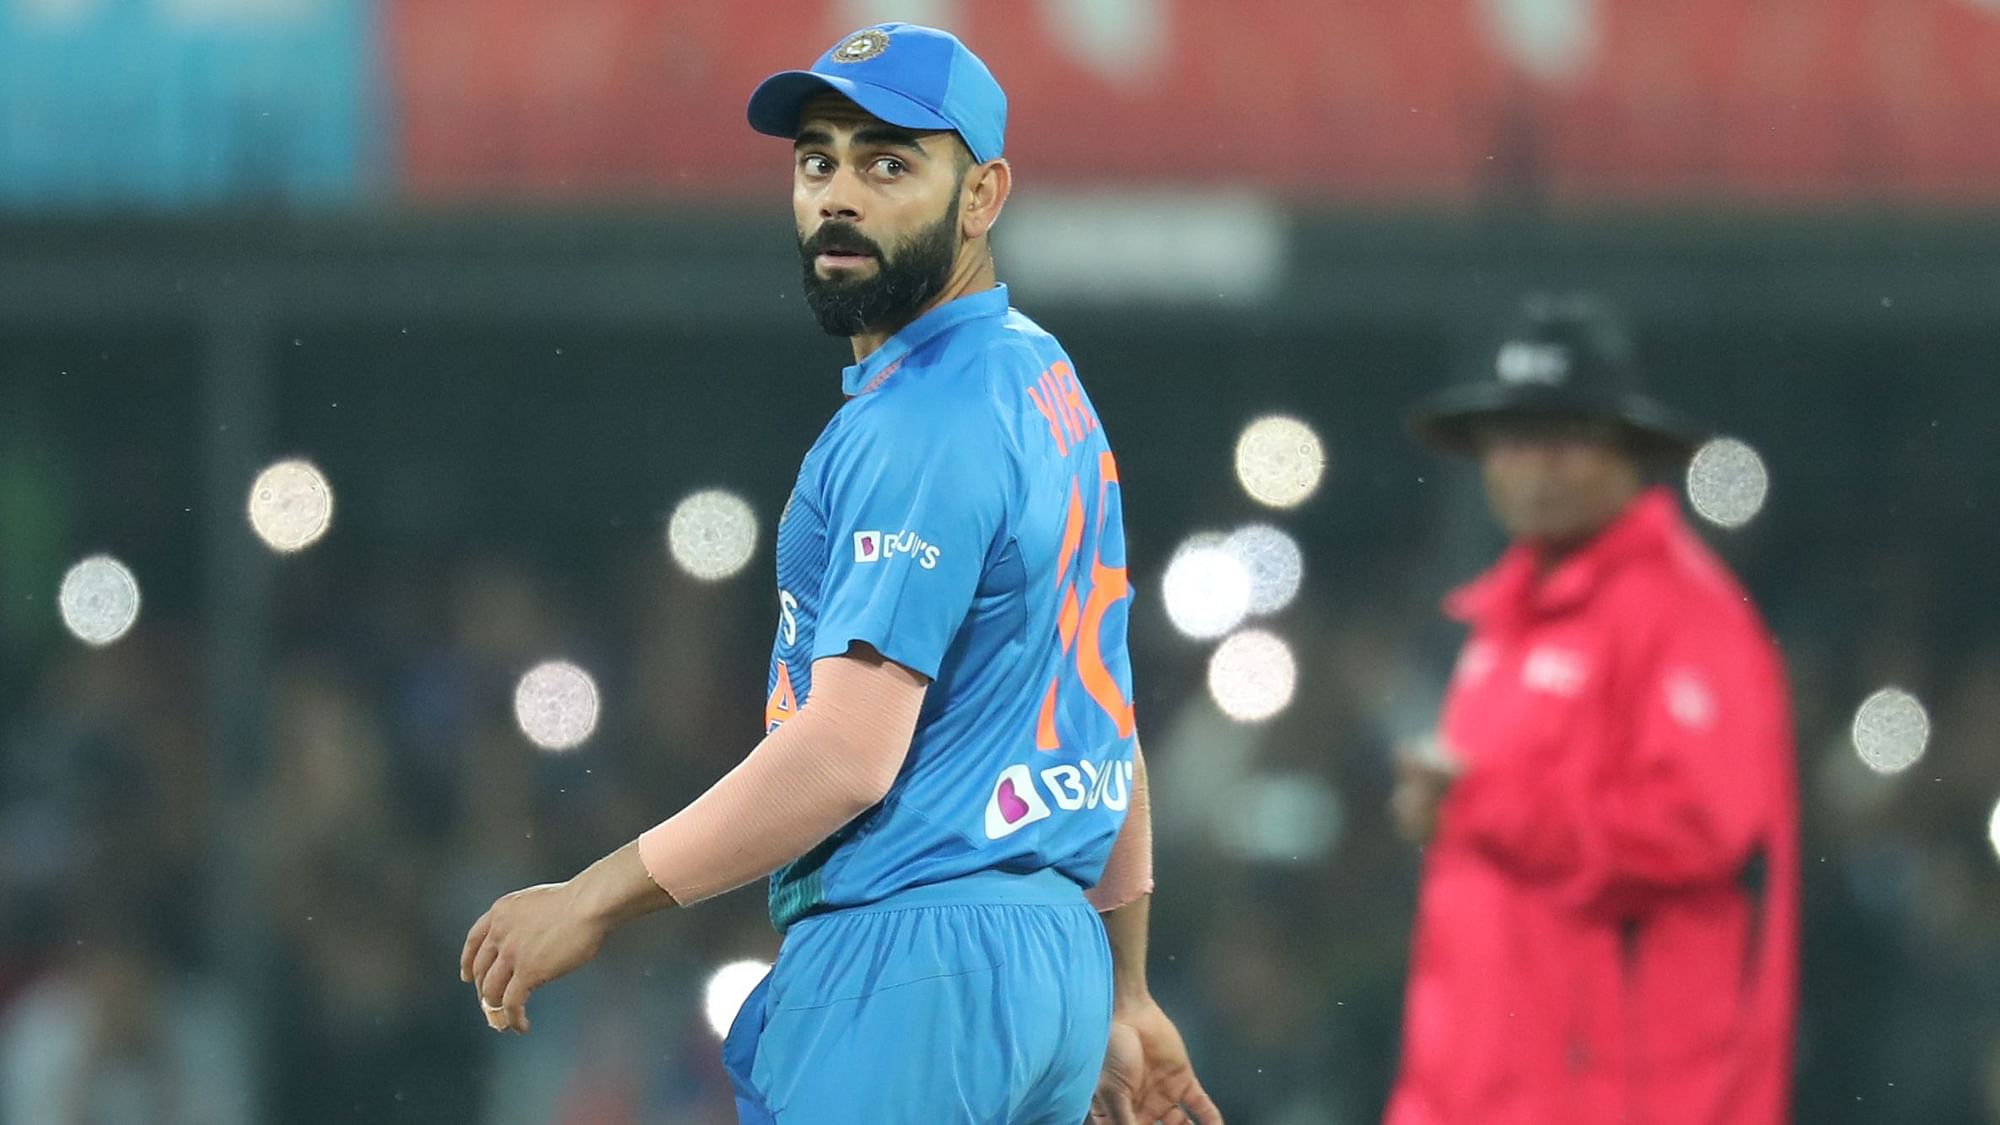 India skipper Virat Kohli has added yet another feather to his cap by becoming the fastest player to score 1,000 runs in T20I cricket as a captain.